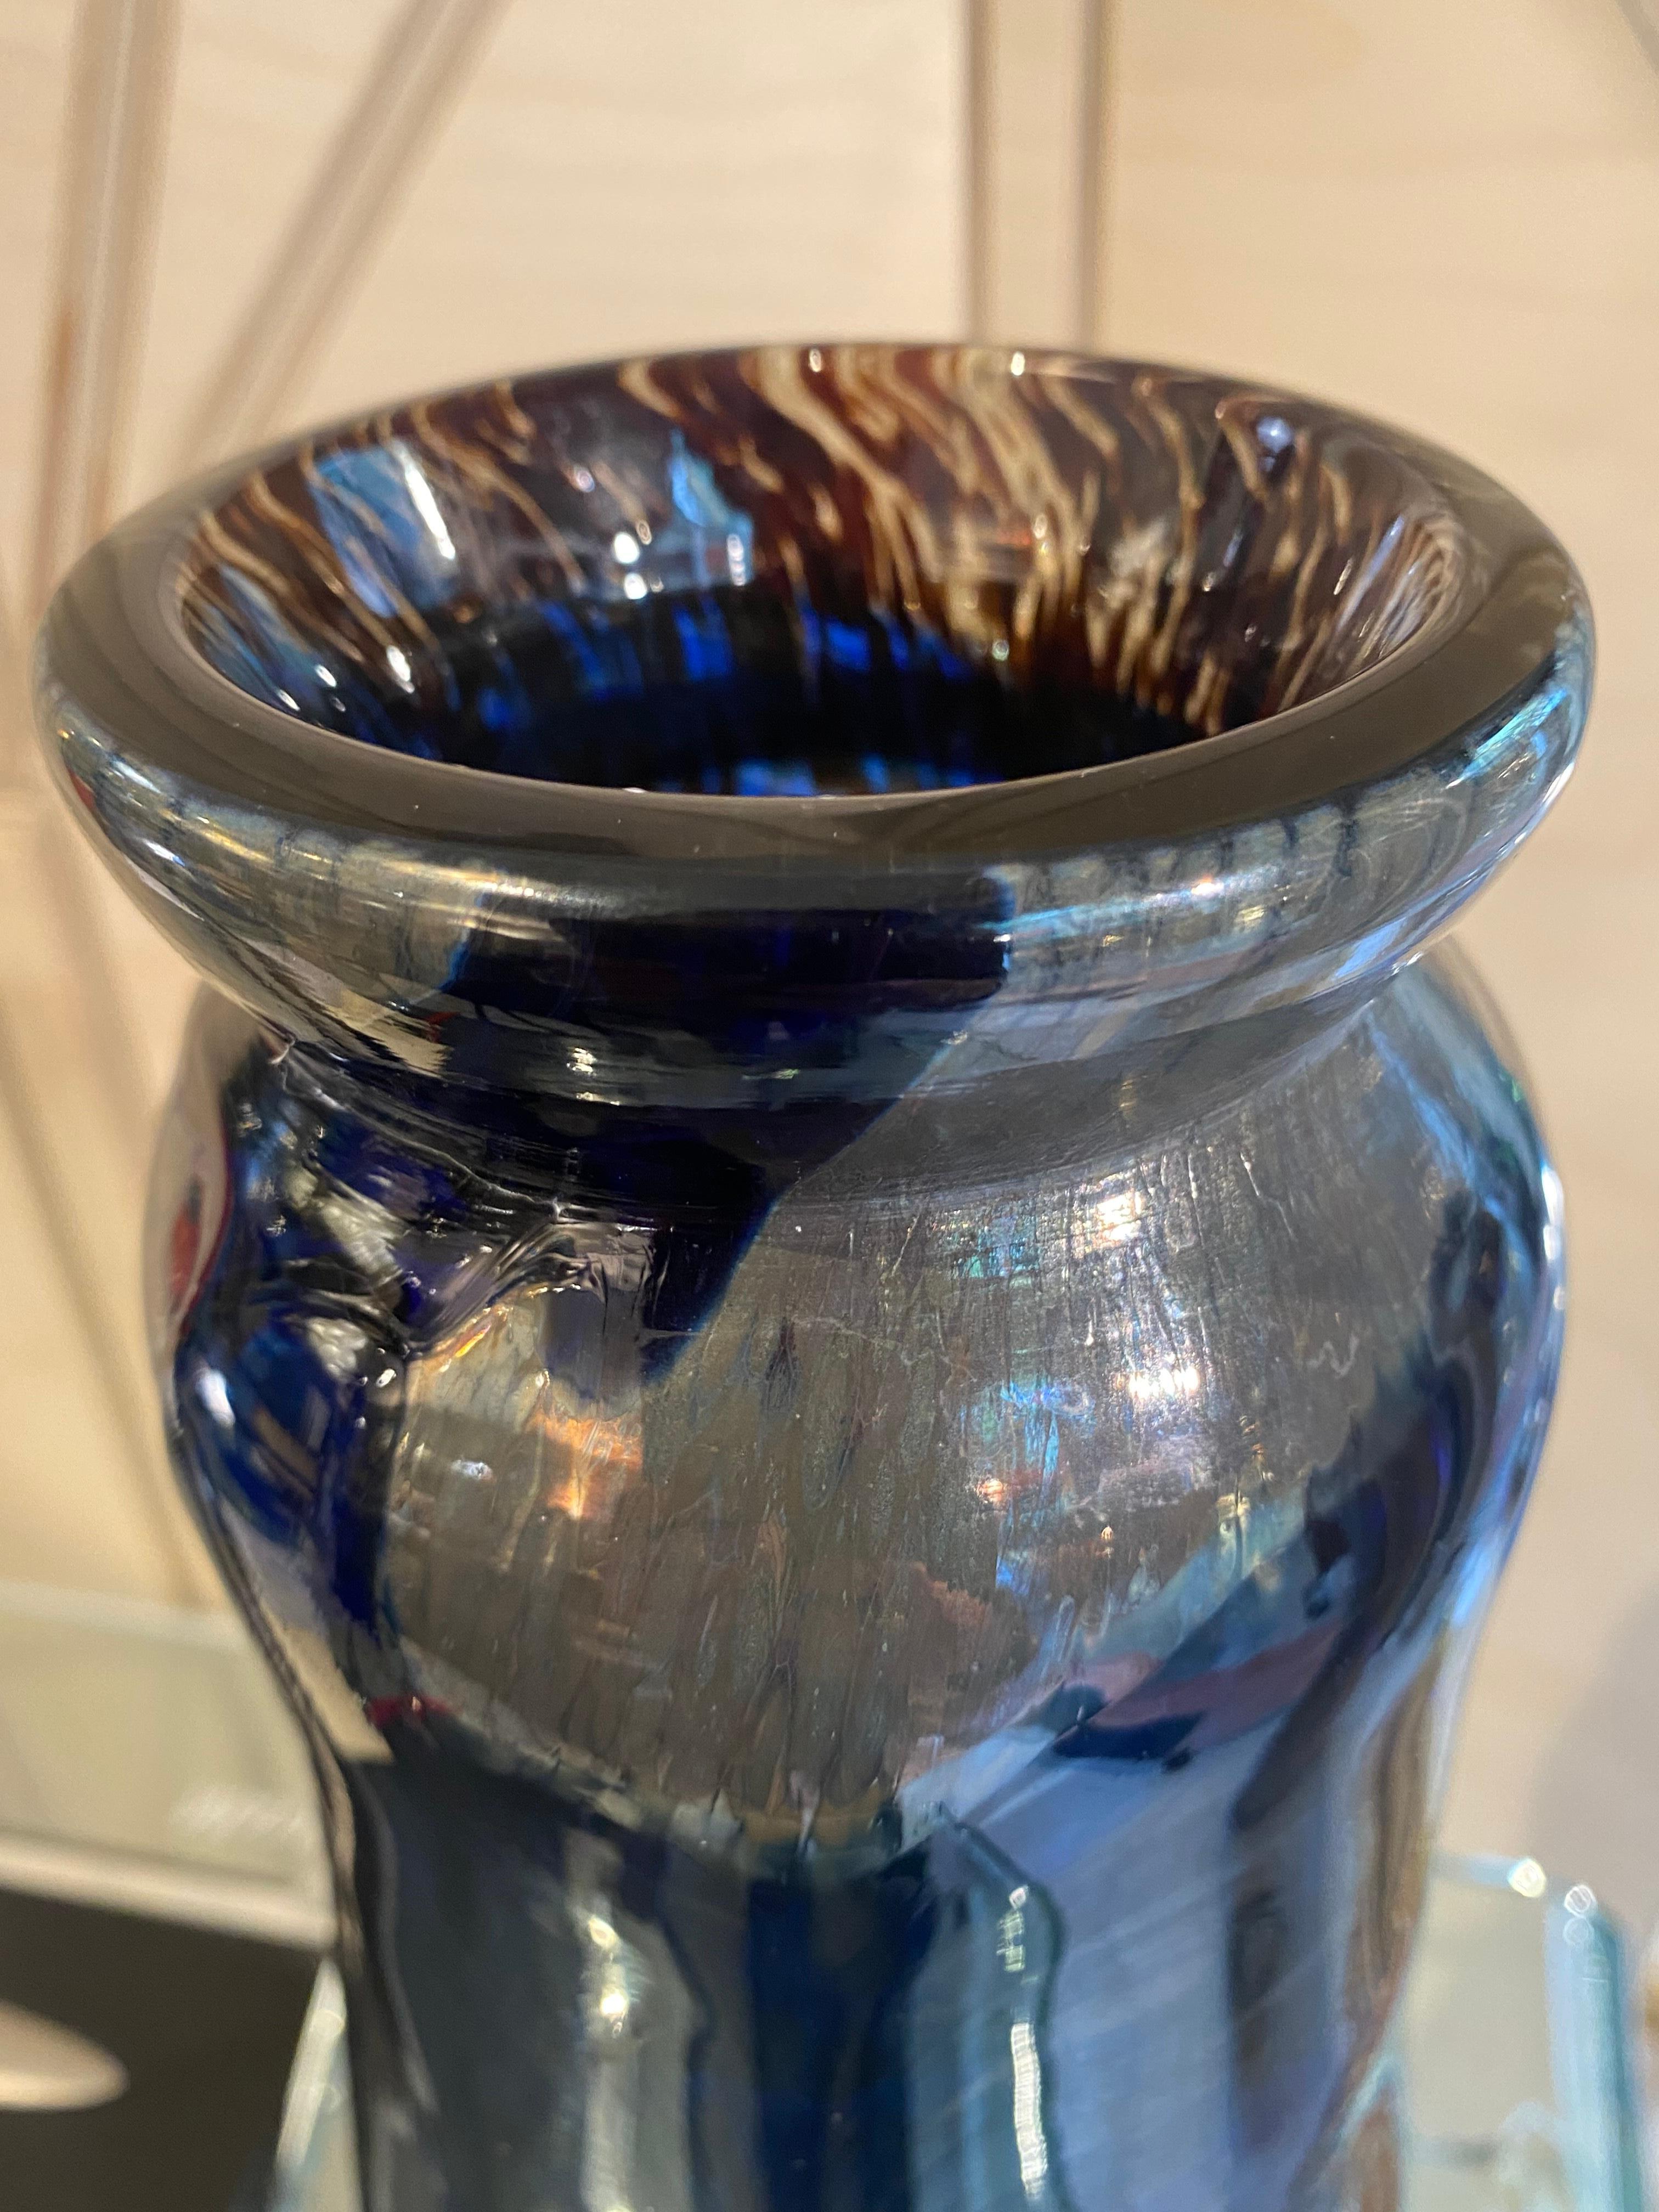 Late 20th Century Glass Vase from Biot Signed Novaro and Dated on the Bottom of the Vase 1977 For Sale